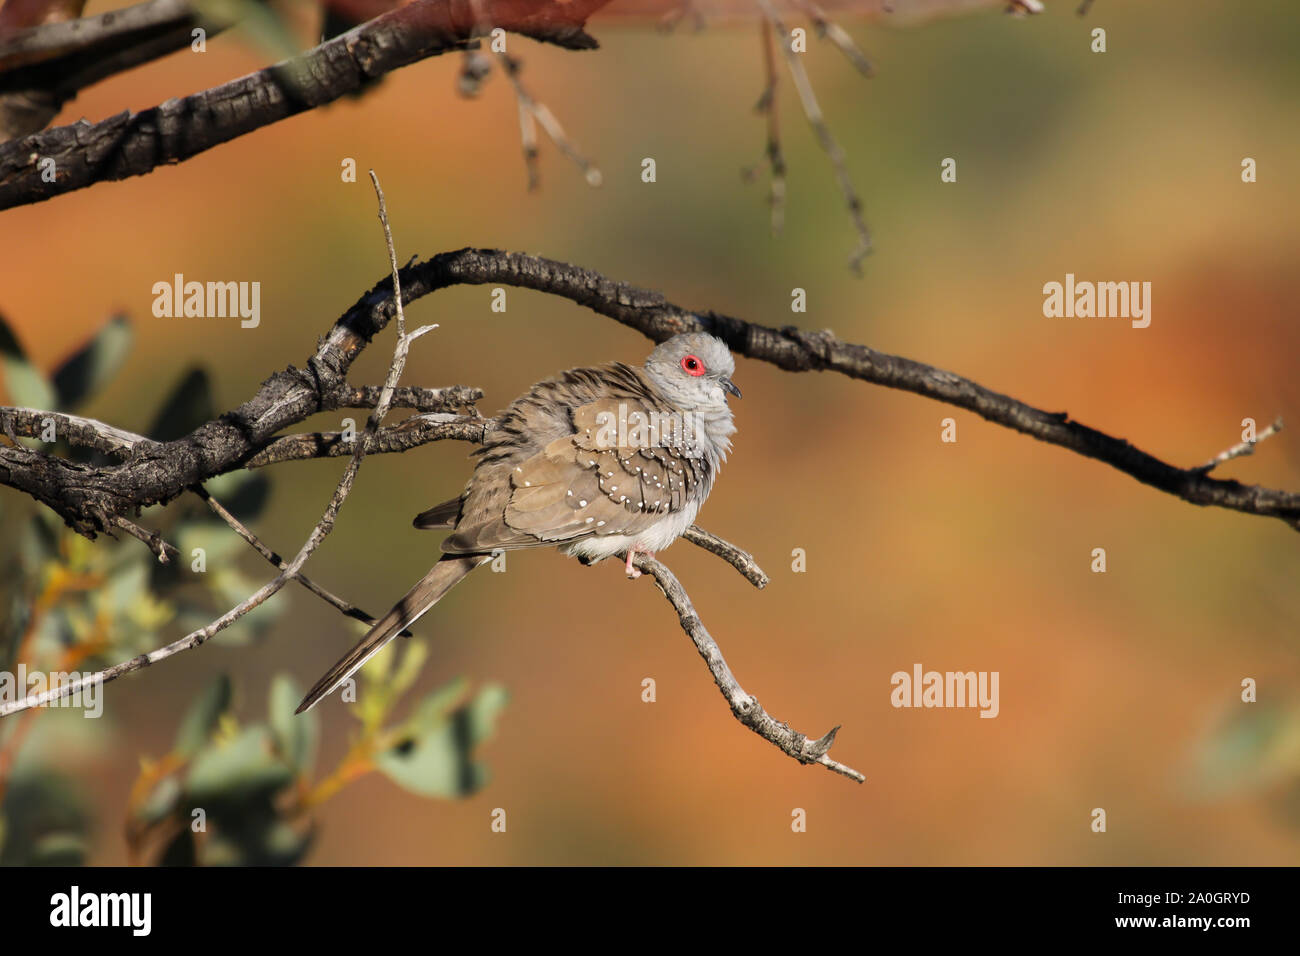 Diamond dove sitting on a branch with defocused natural background, Kings Canyon, Northern Territor Stock Photo